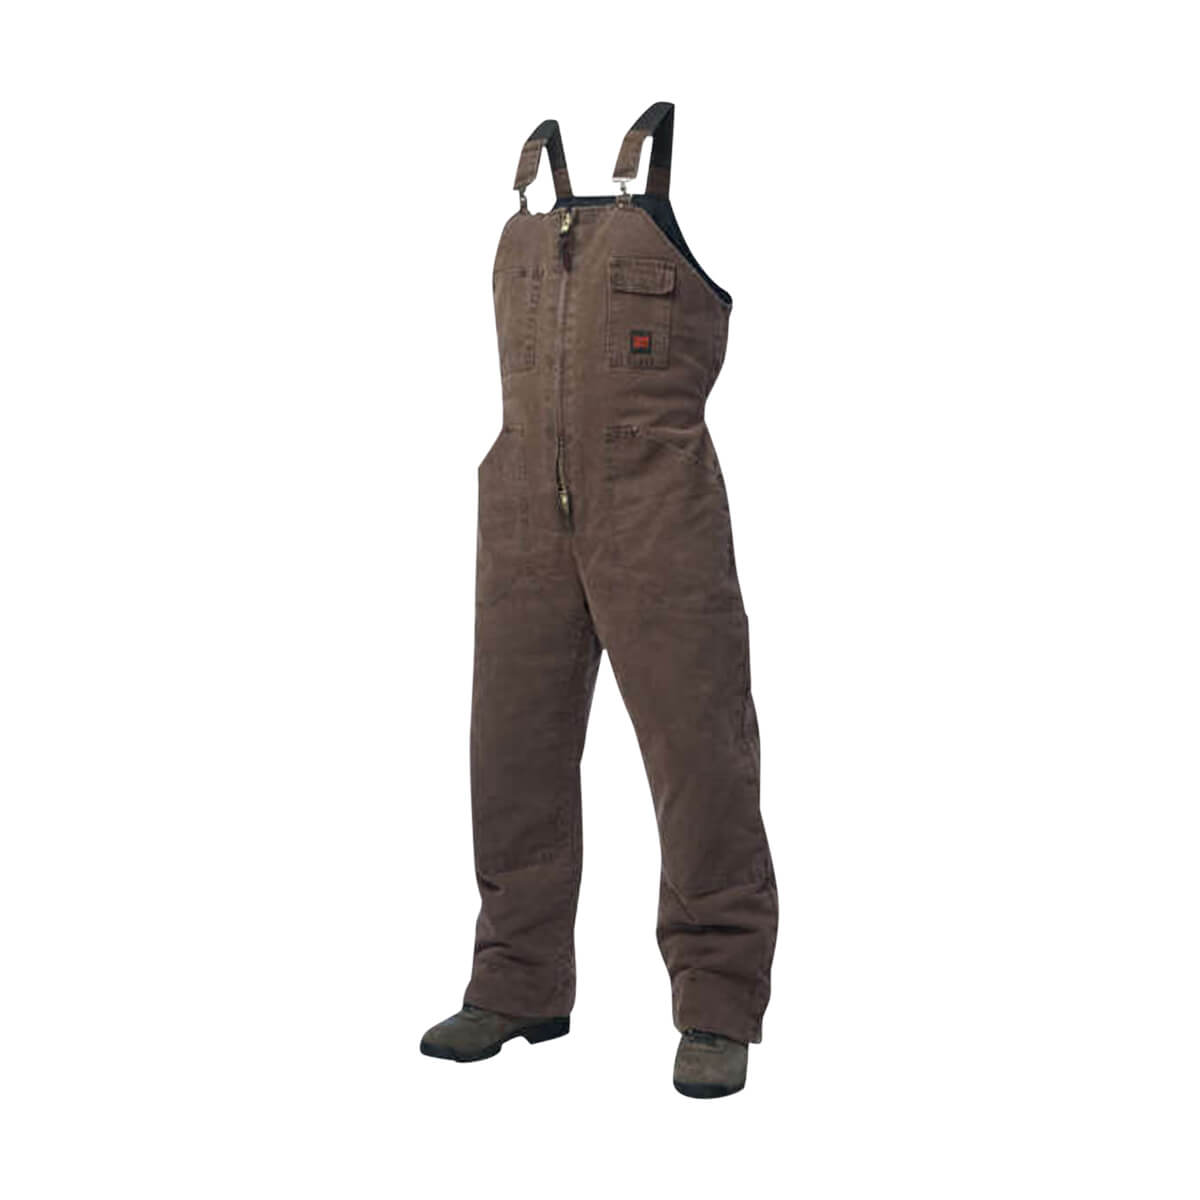 Tough Duck Washed Lined Bib Overall - Chestnut